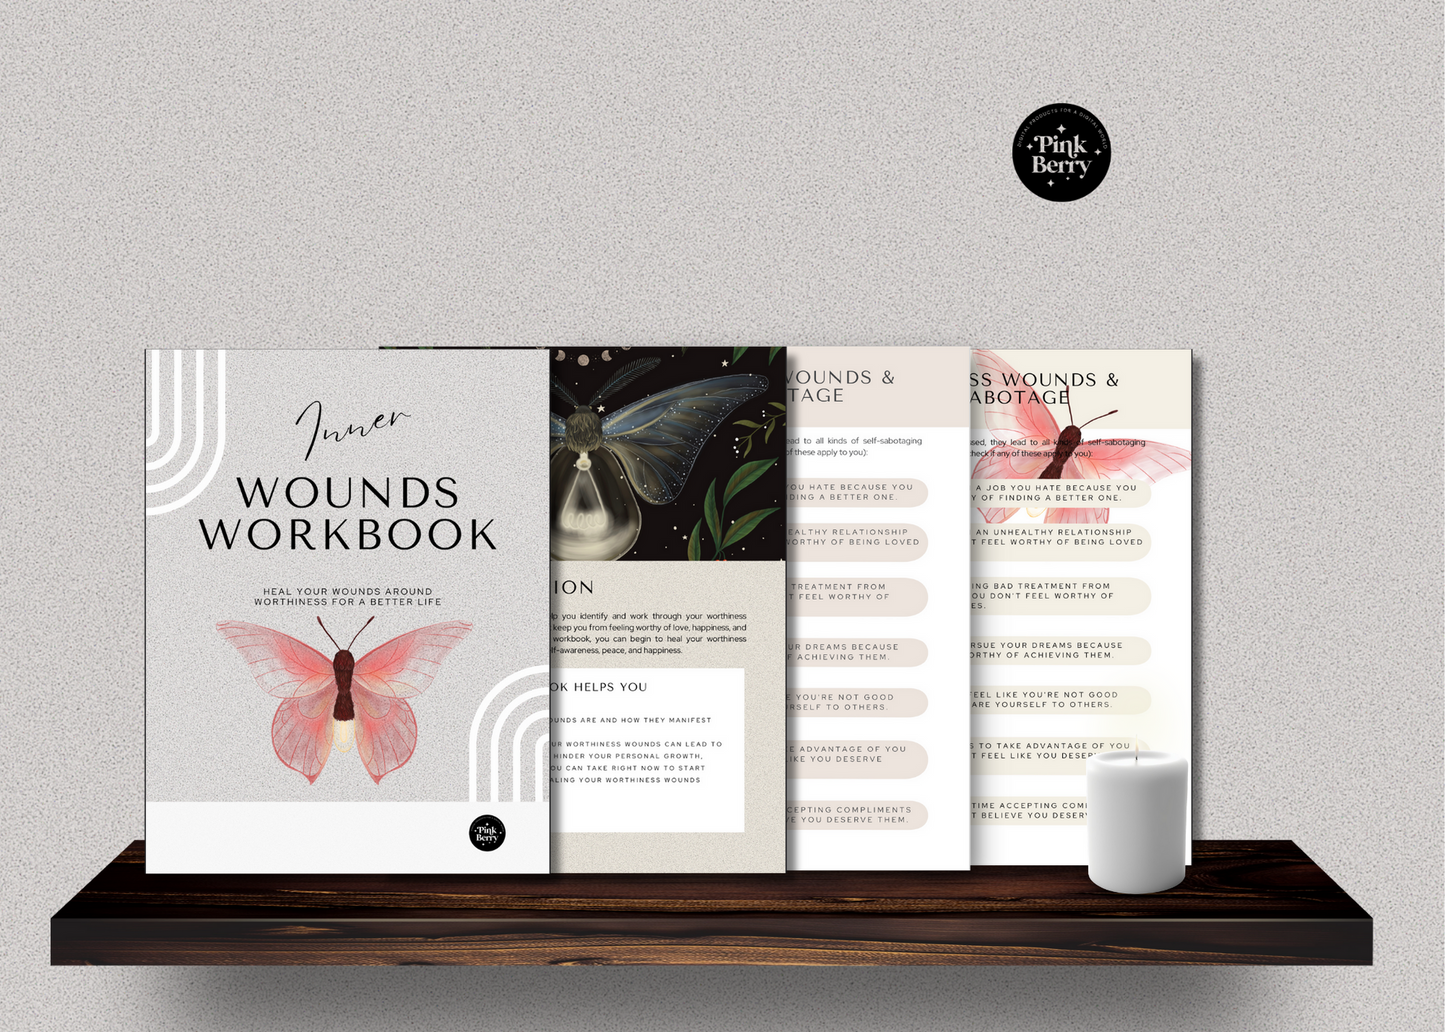 Printable Inner Wounds Workbook- 40 Page Printable With 6 Steps And 28 Journal Prompts